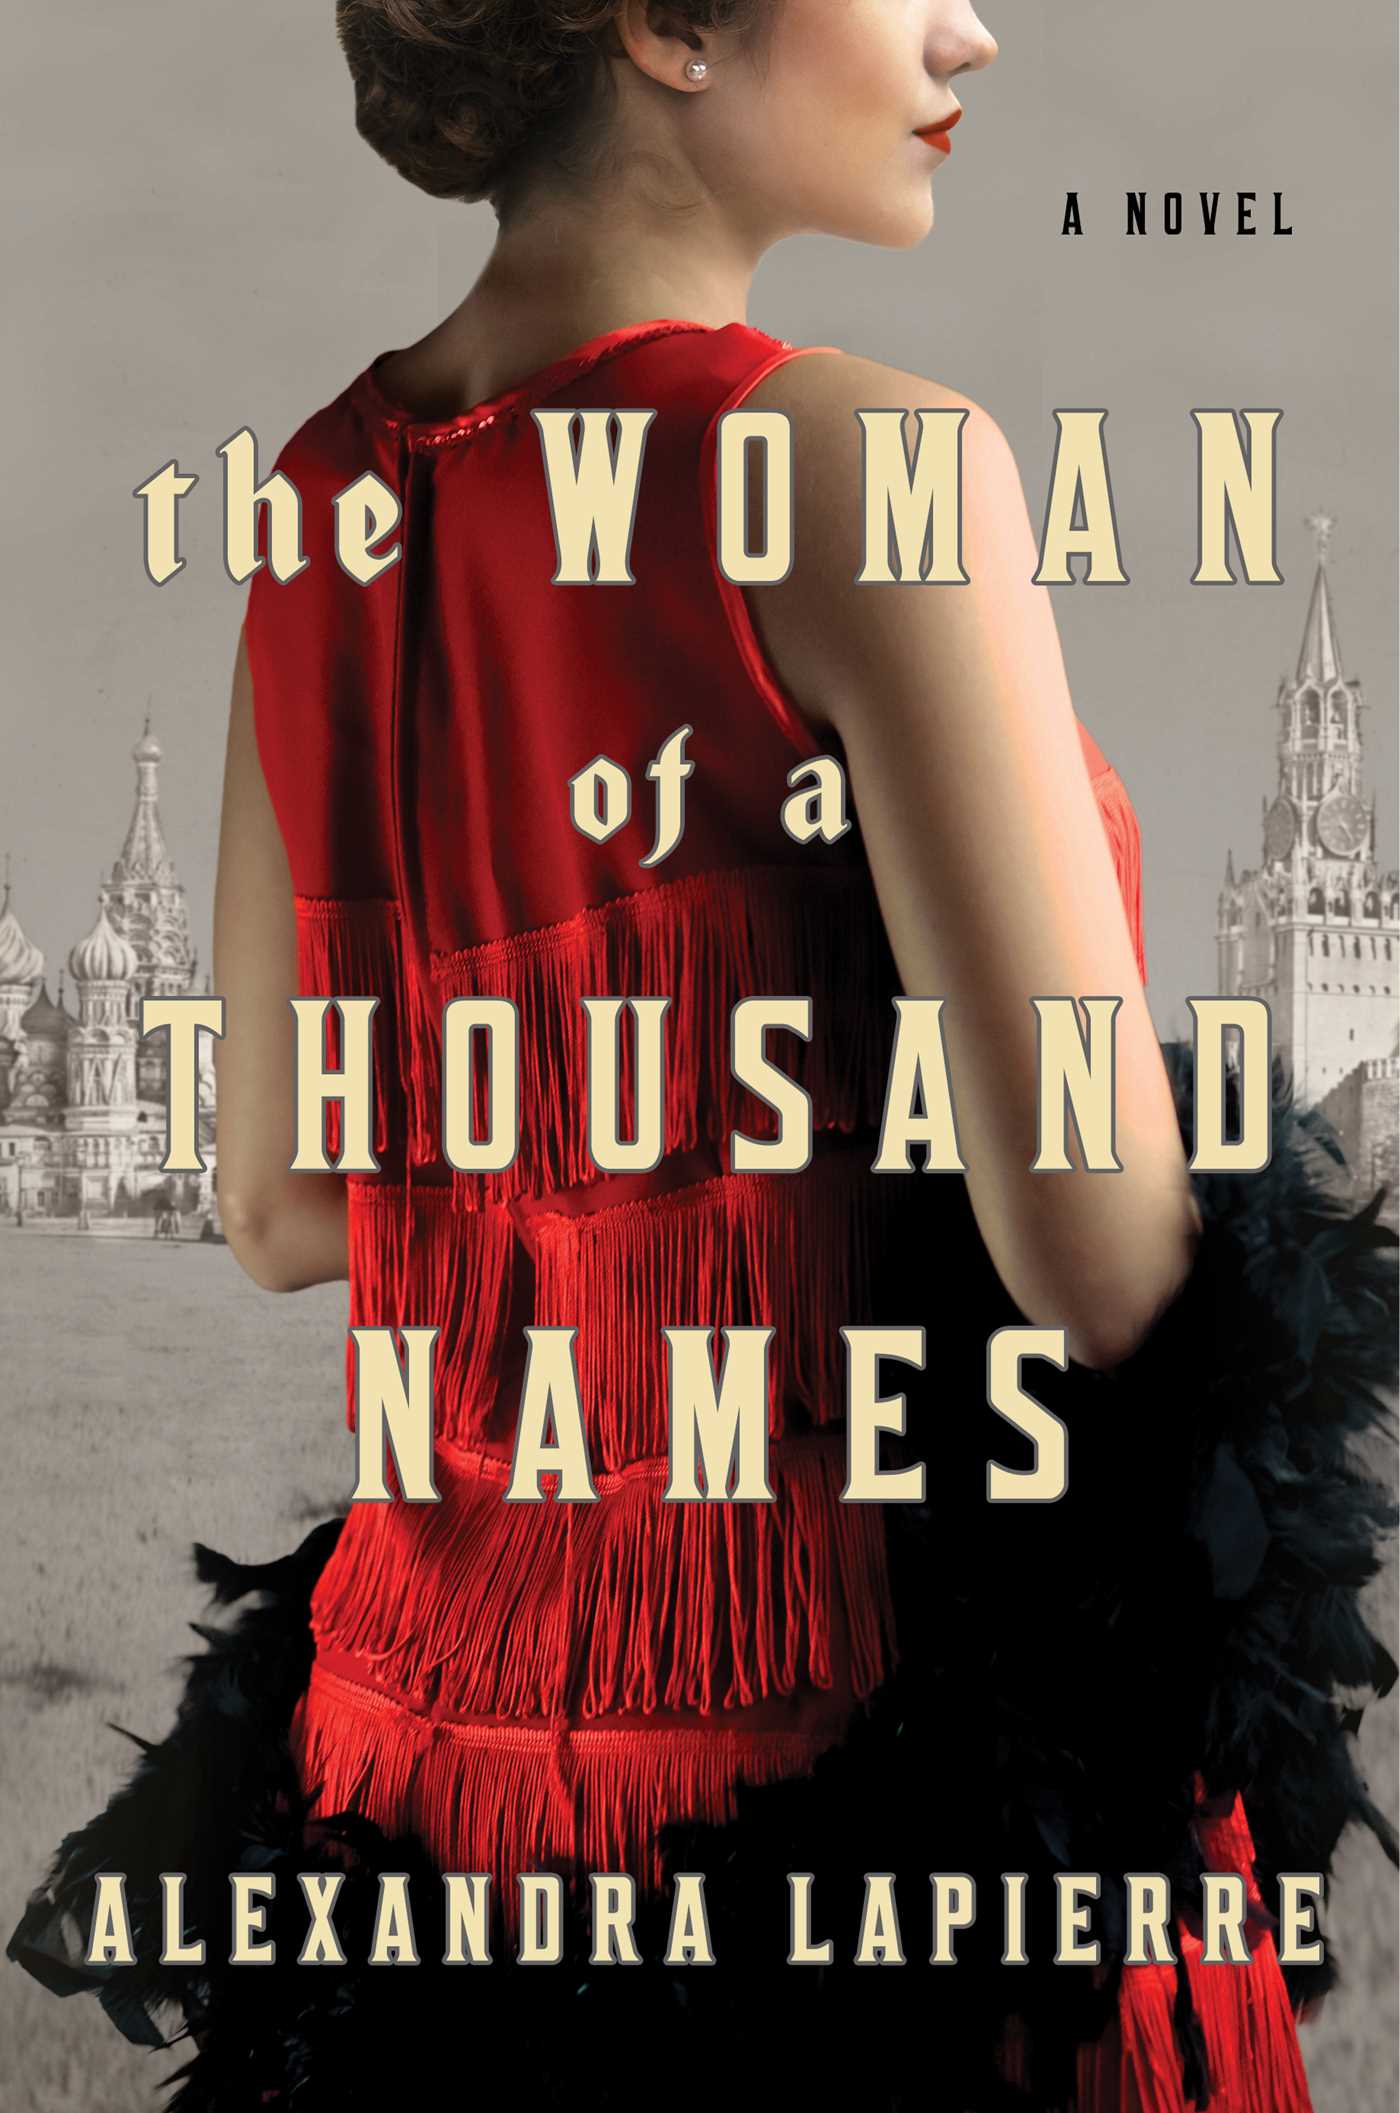 The Woman of a Thousand Names